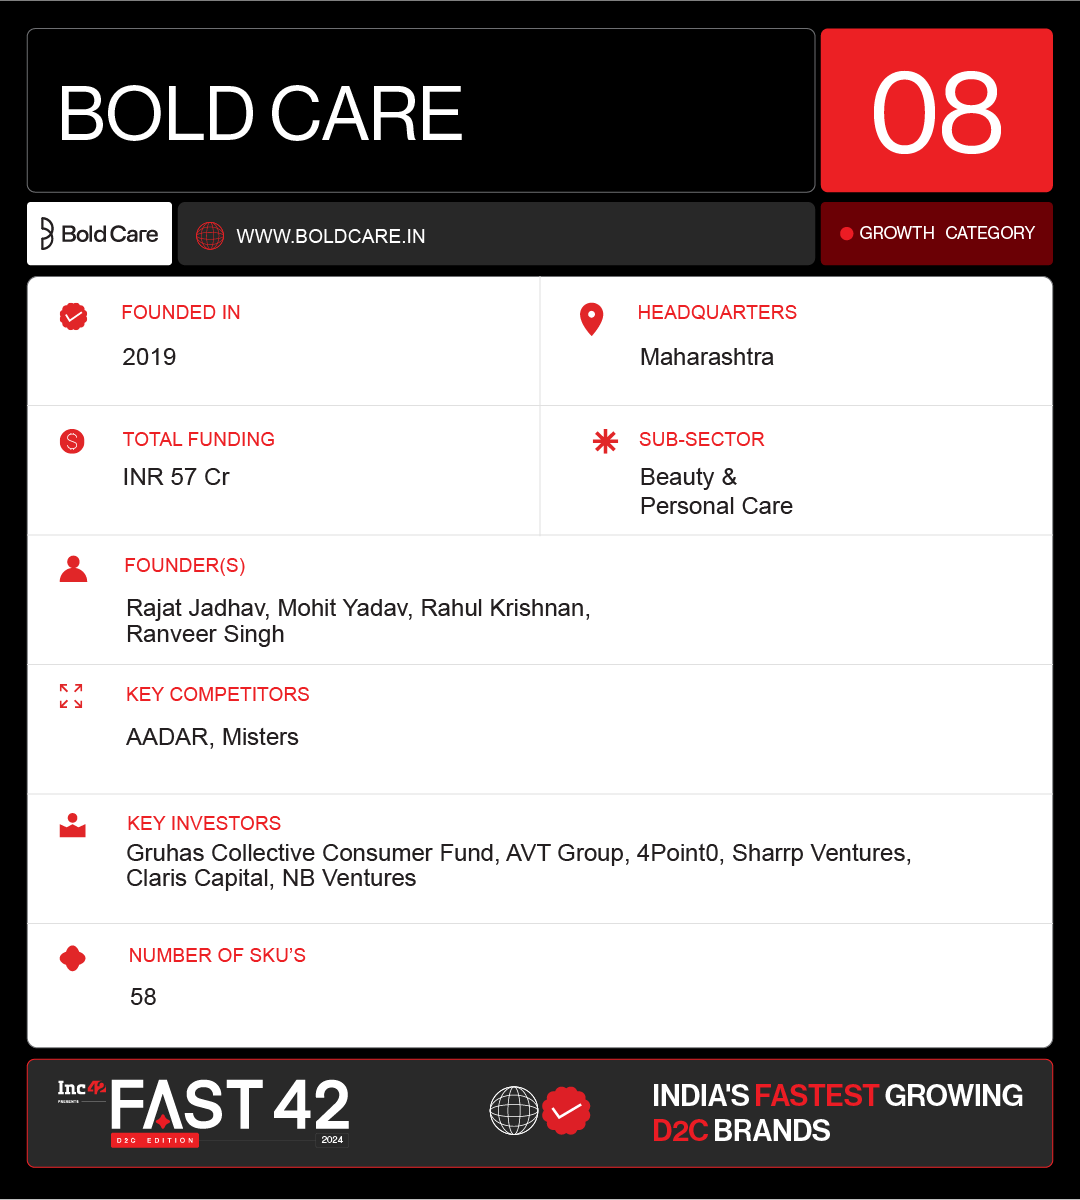 Bold Care Is Taking Bold Care Of Men’s Sexual Health & Wellness